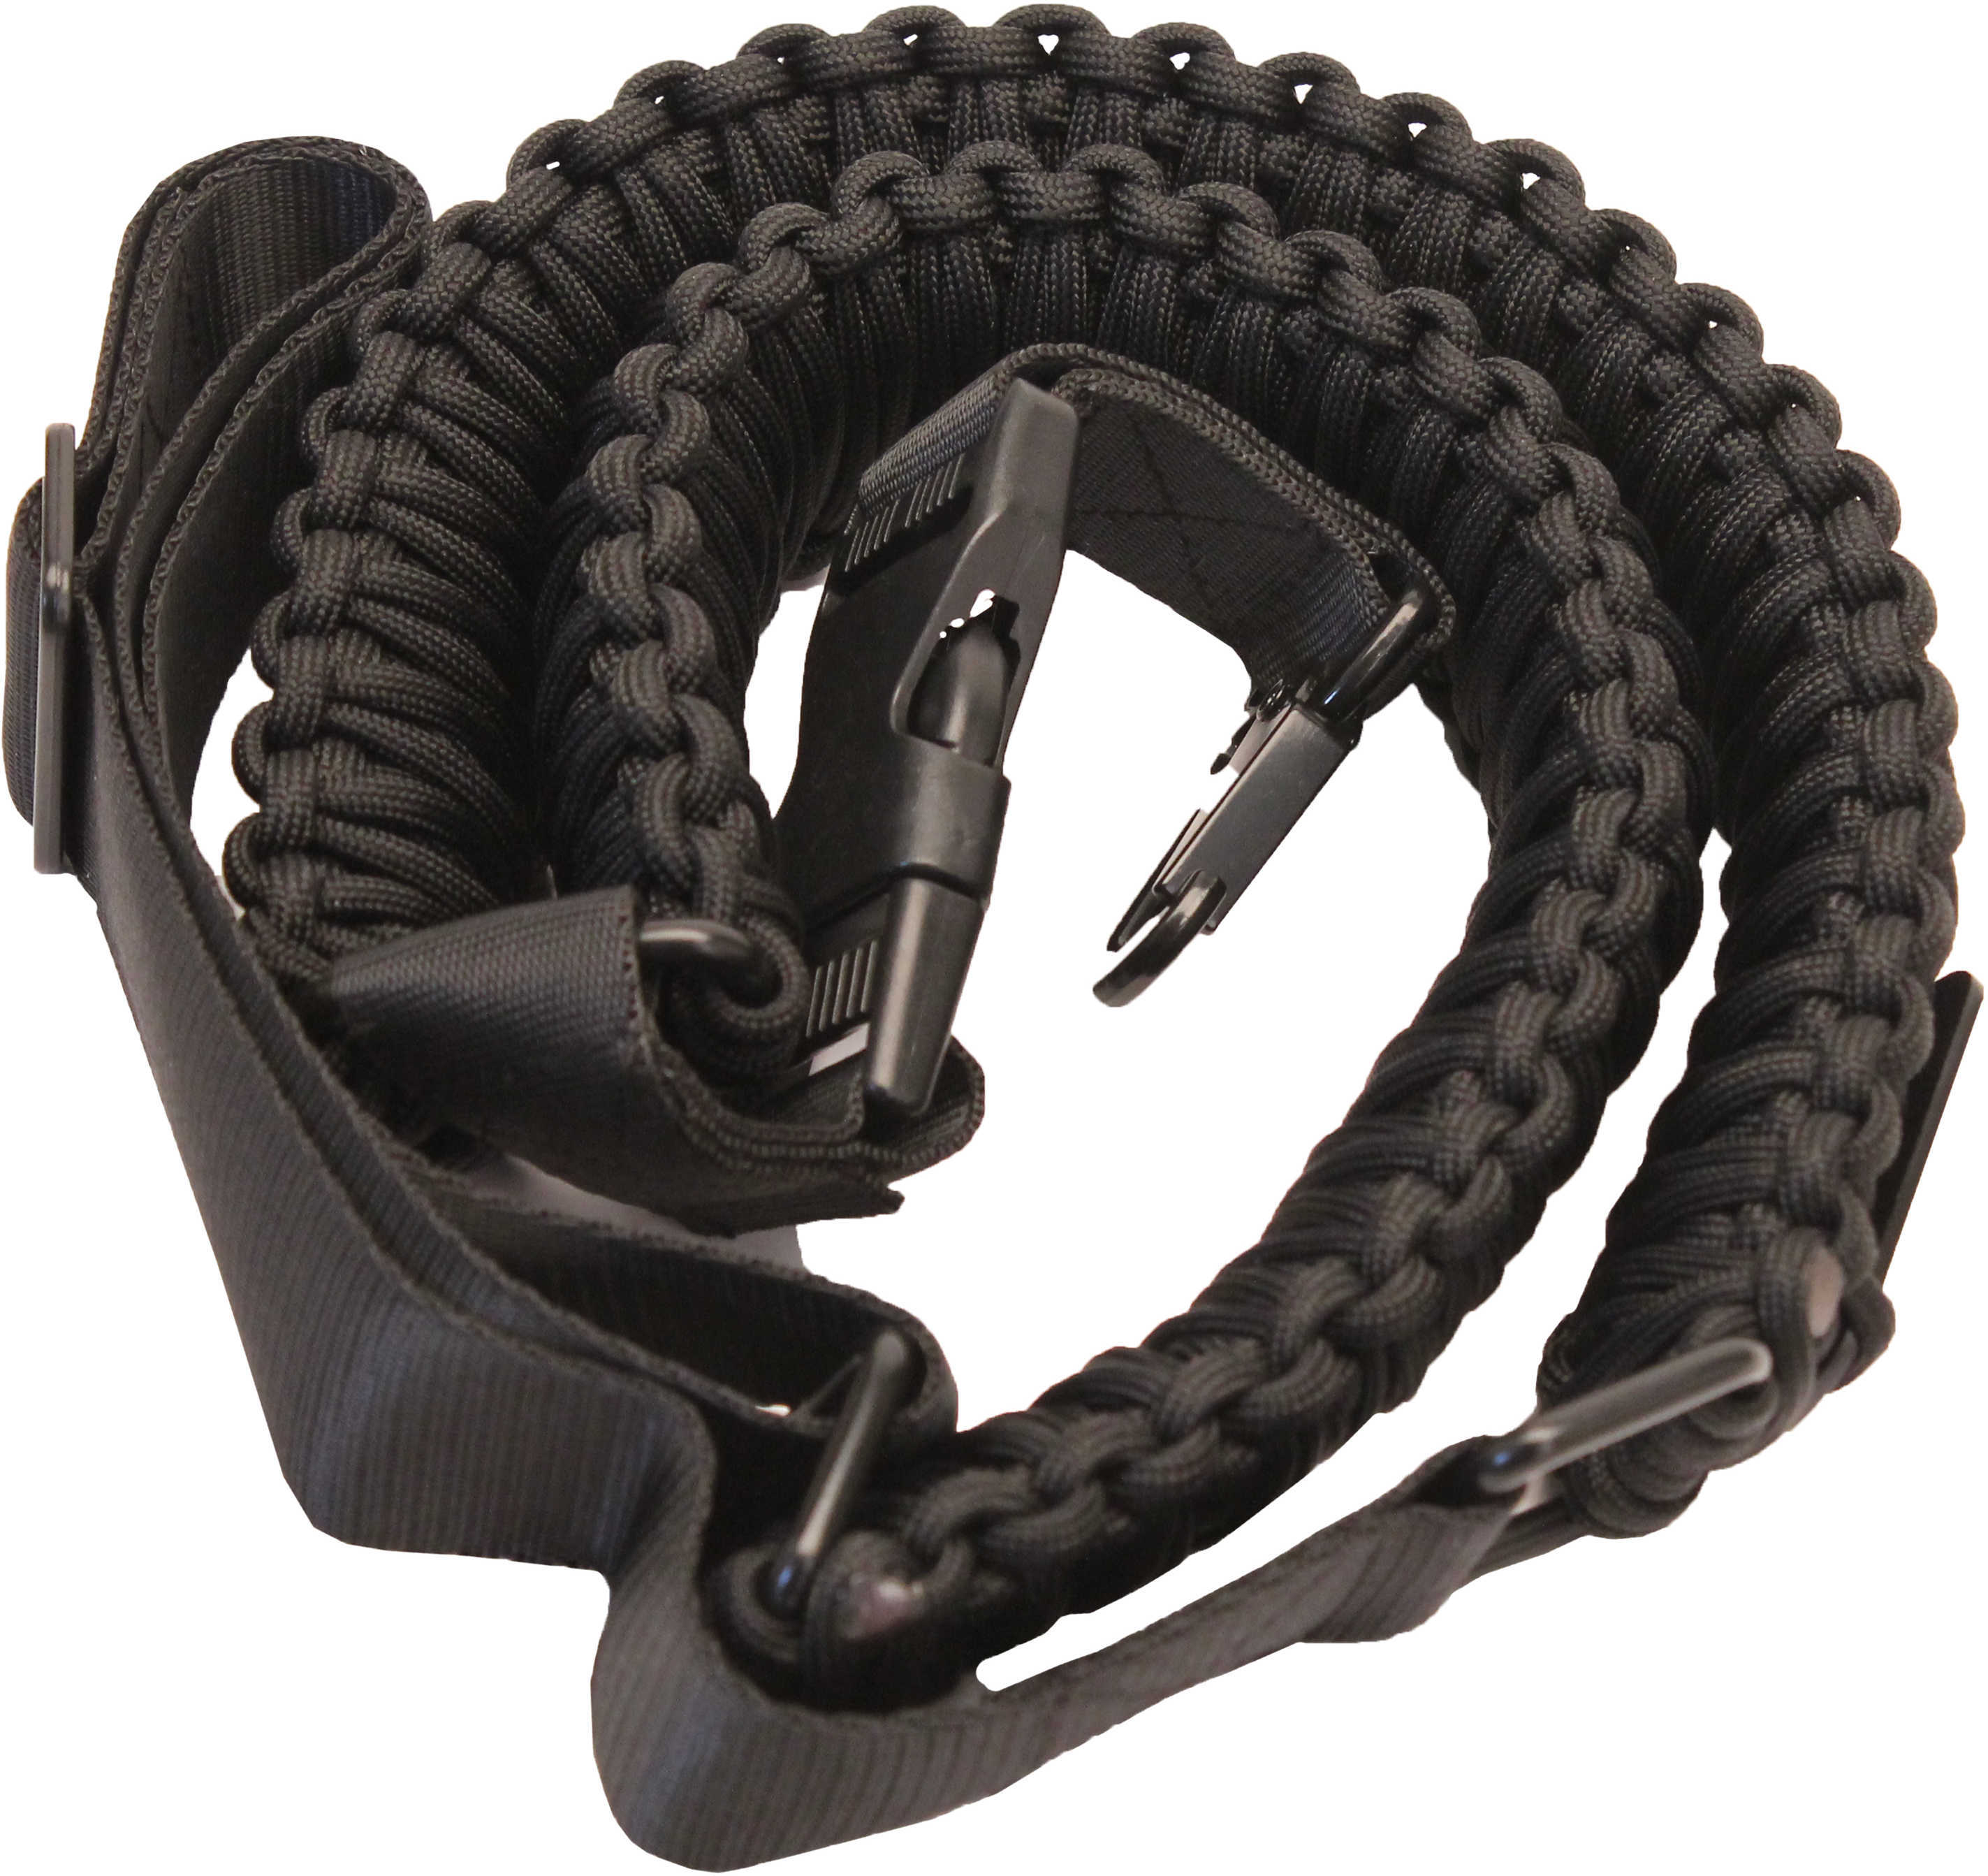 Firefield Tactical Paracord Sling Single Point, Black Md: FF46000